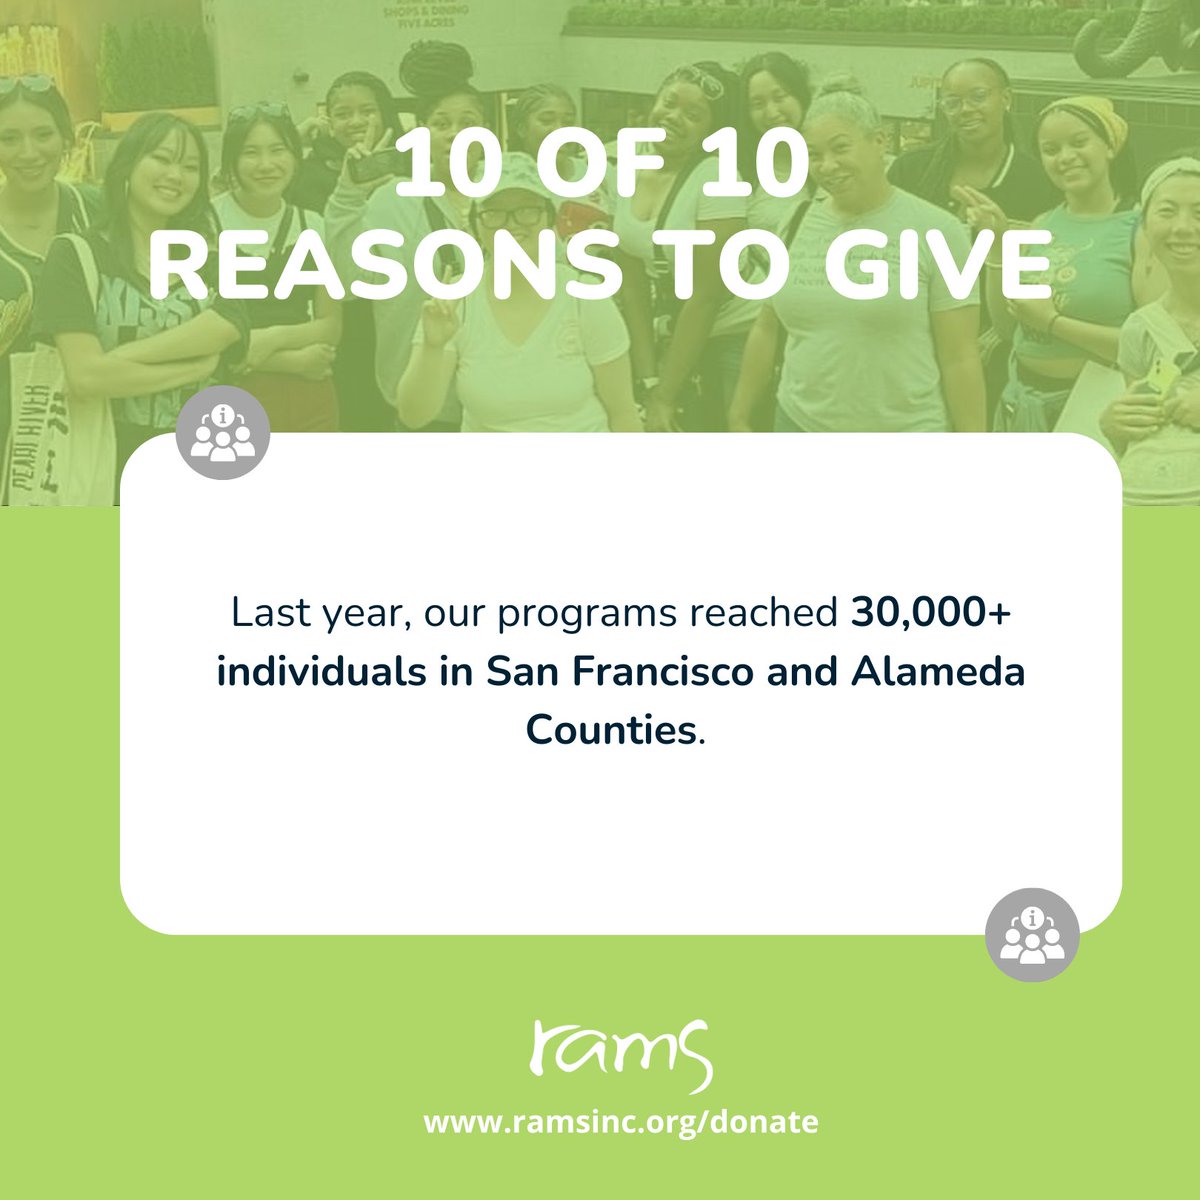 10 of 10 Reasons to Give to RAMS: See the transformative difference your donations have made - last year, our programs reached 30,000+ individuals in SF & Alameda Counties. Join us this holiday season in transforming more lives! Donate today ramsinc.org/donate